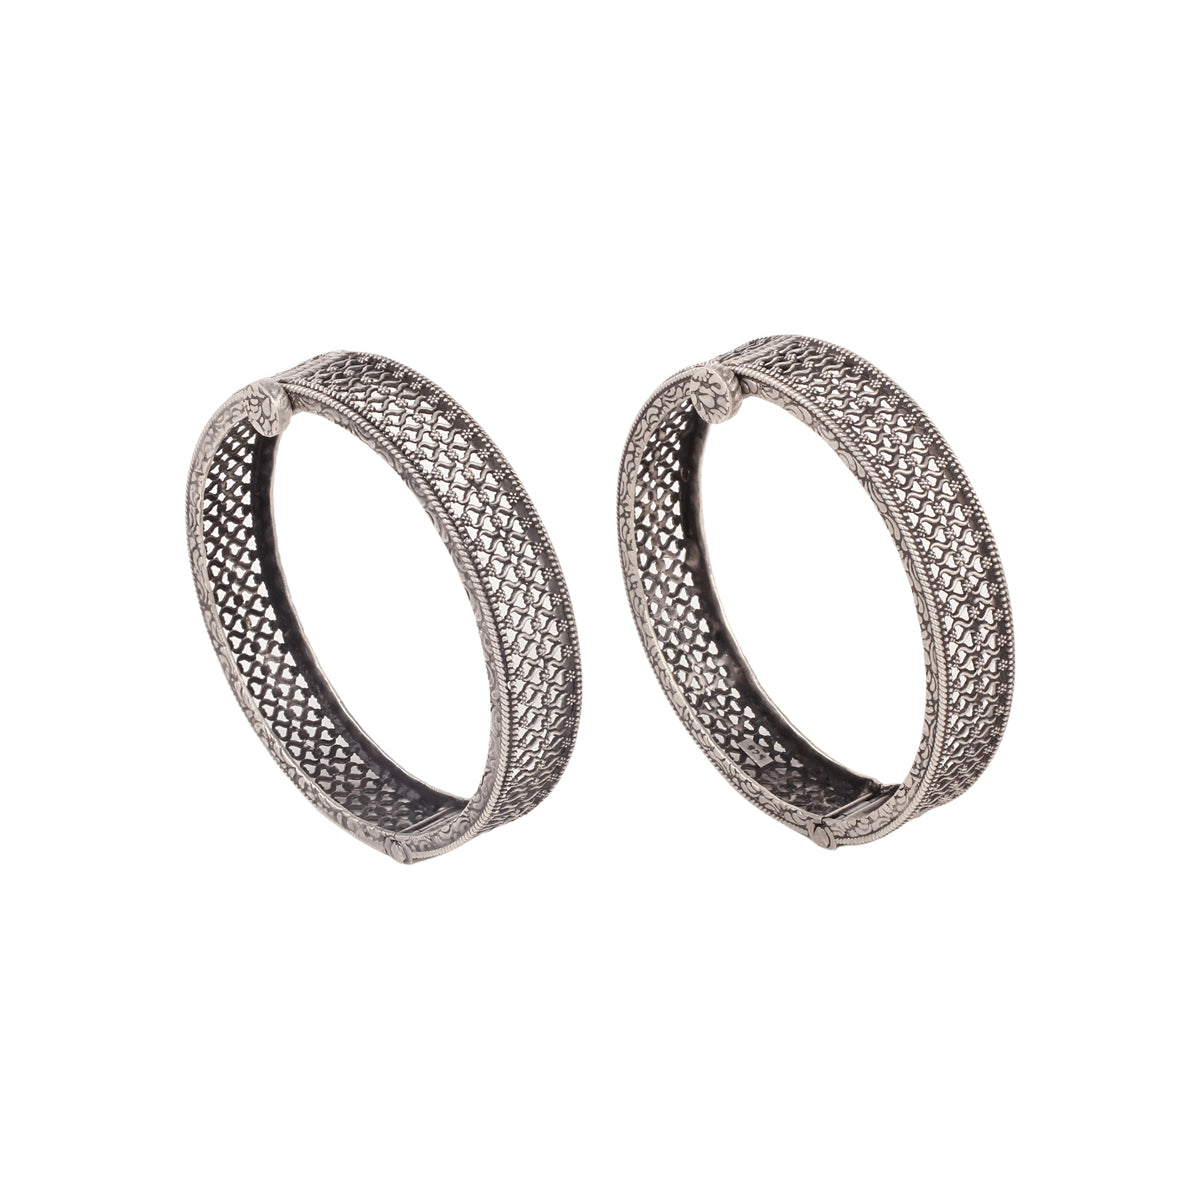 Mesh Carved Openable Bangles (Pair)